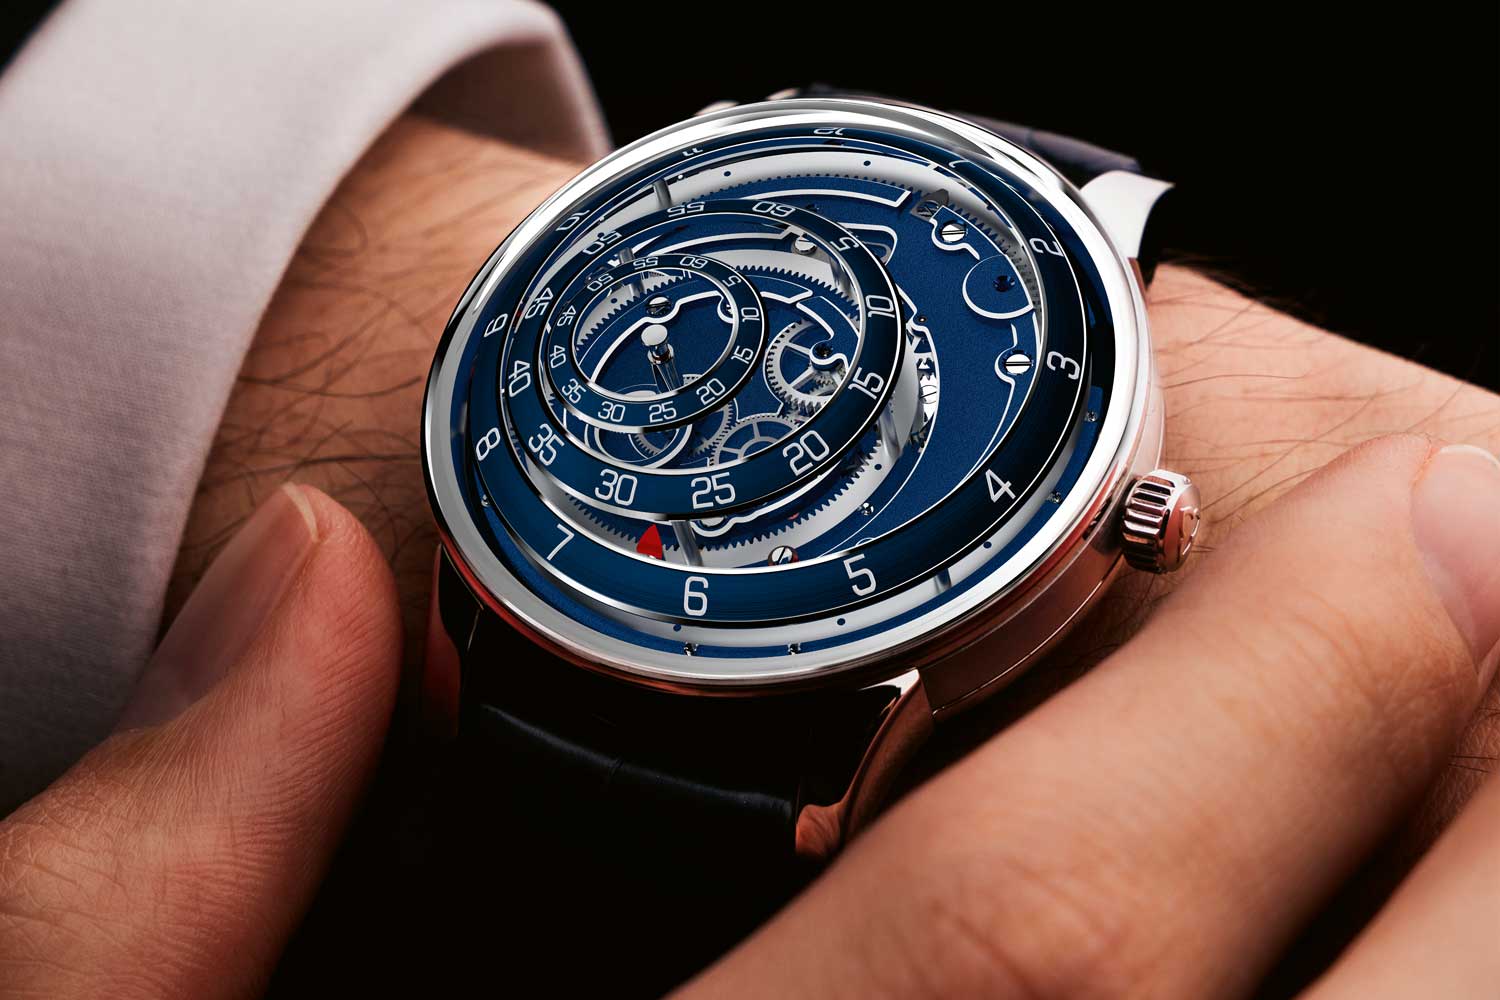 Grail Watch 3: Trilobe Une Folle Soirée "Wild Night"; Despite it being 40.5mm in diameter with a thickness of 17.8mm, and aggressively domed, the watch wears much thinner and effortlessly on the wrist